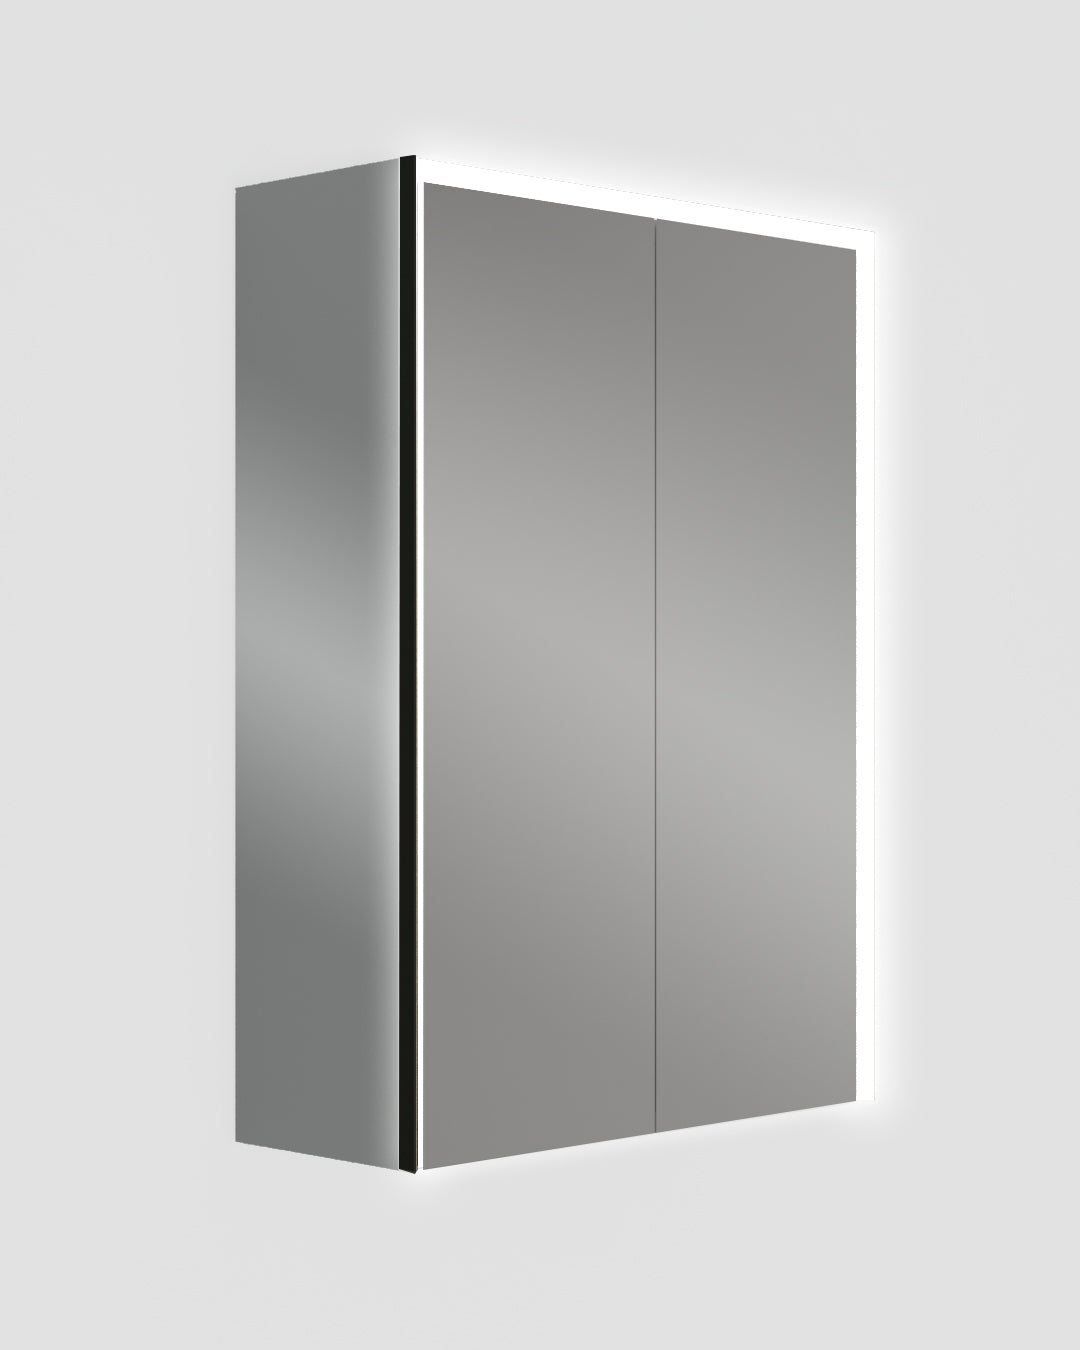 BH Mirror Cabinet Perimeter LED with Mirrored Sides